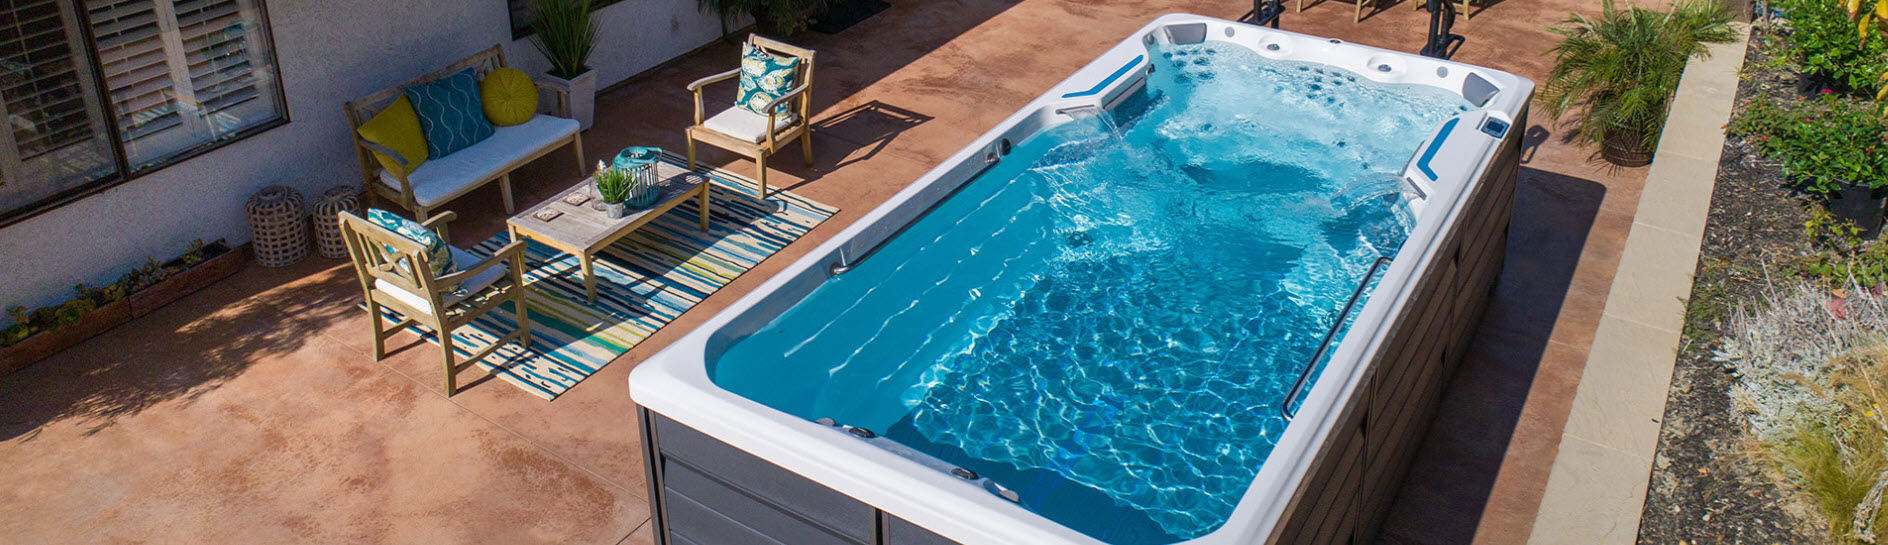 3 Reasons to Consider a Lap Pool for Your Home, Swim Spa Dealer Oconomowoc